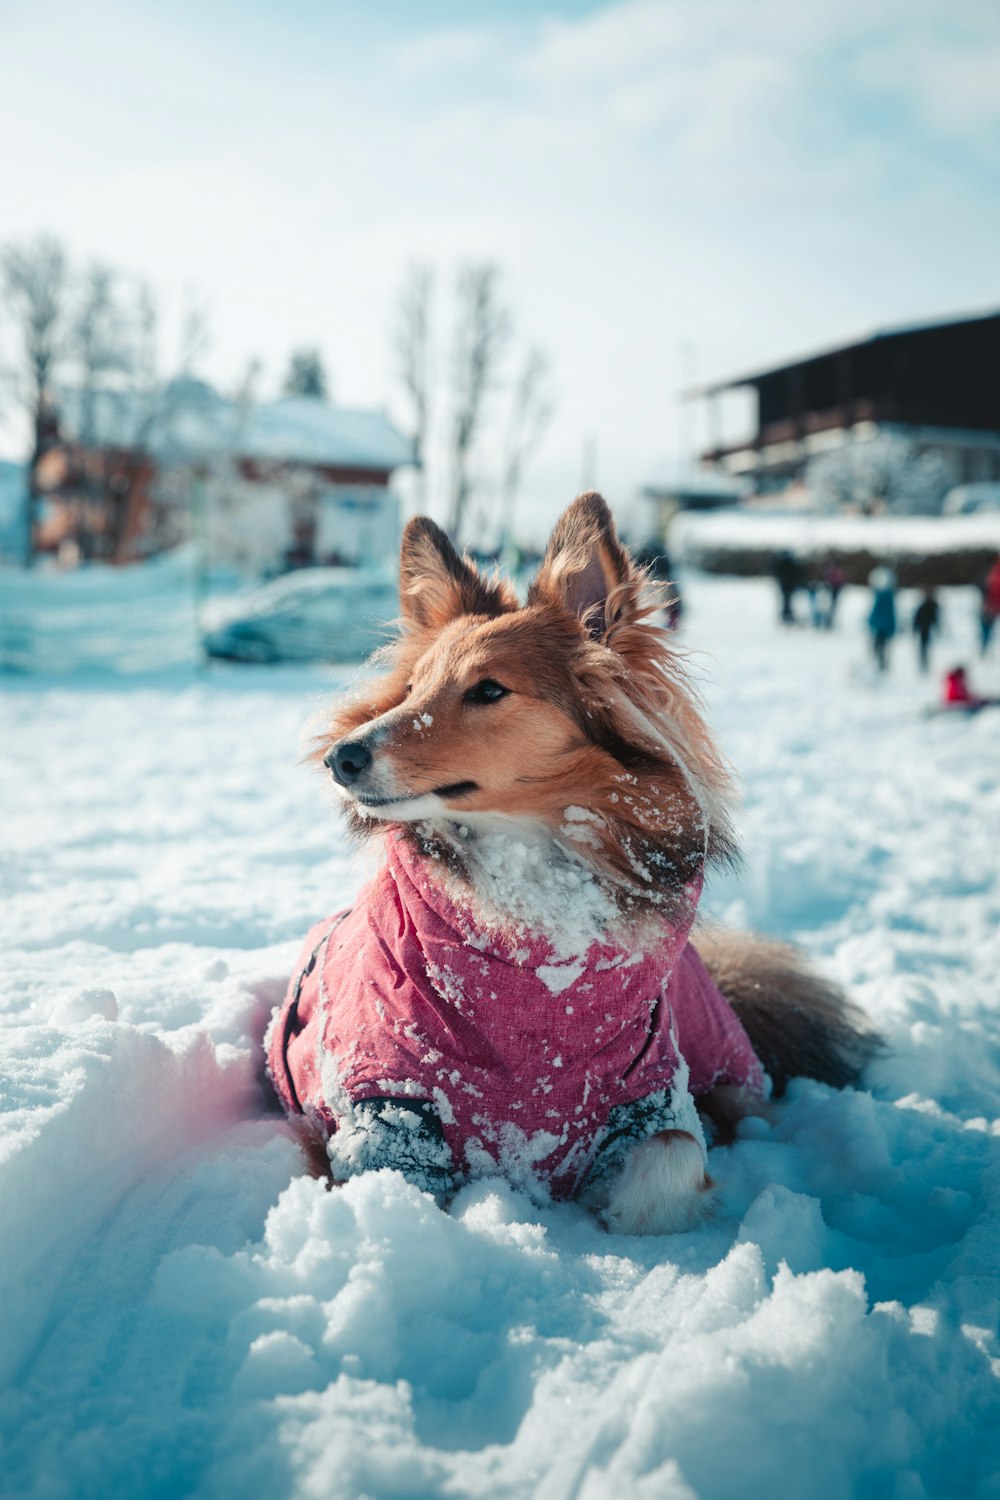 a dog sitting in the snow wearing a pink shirt